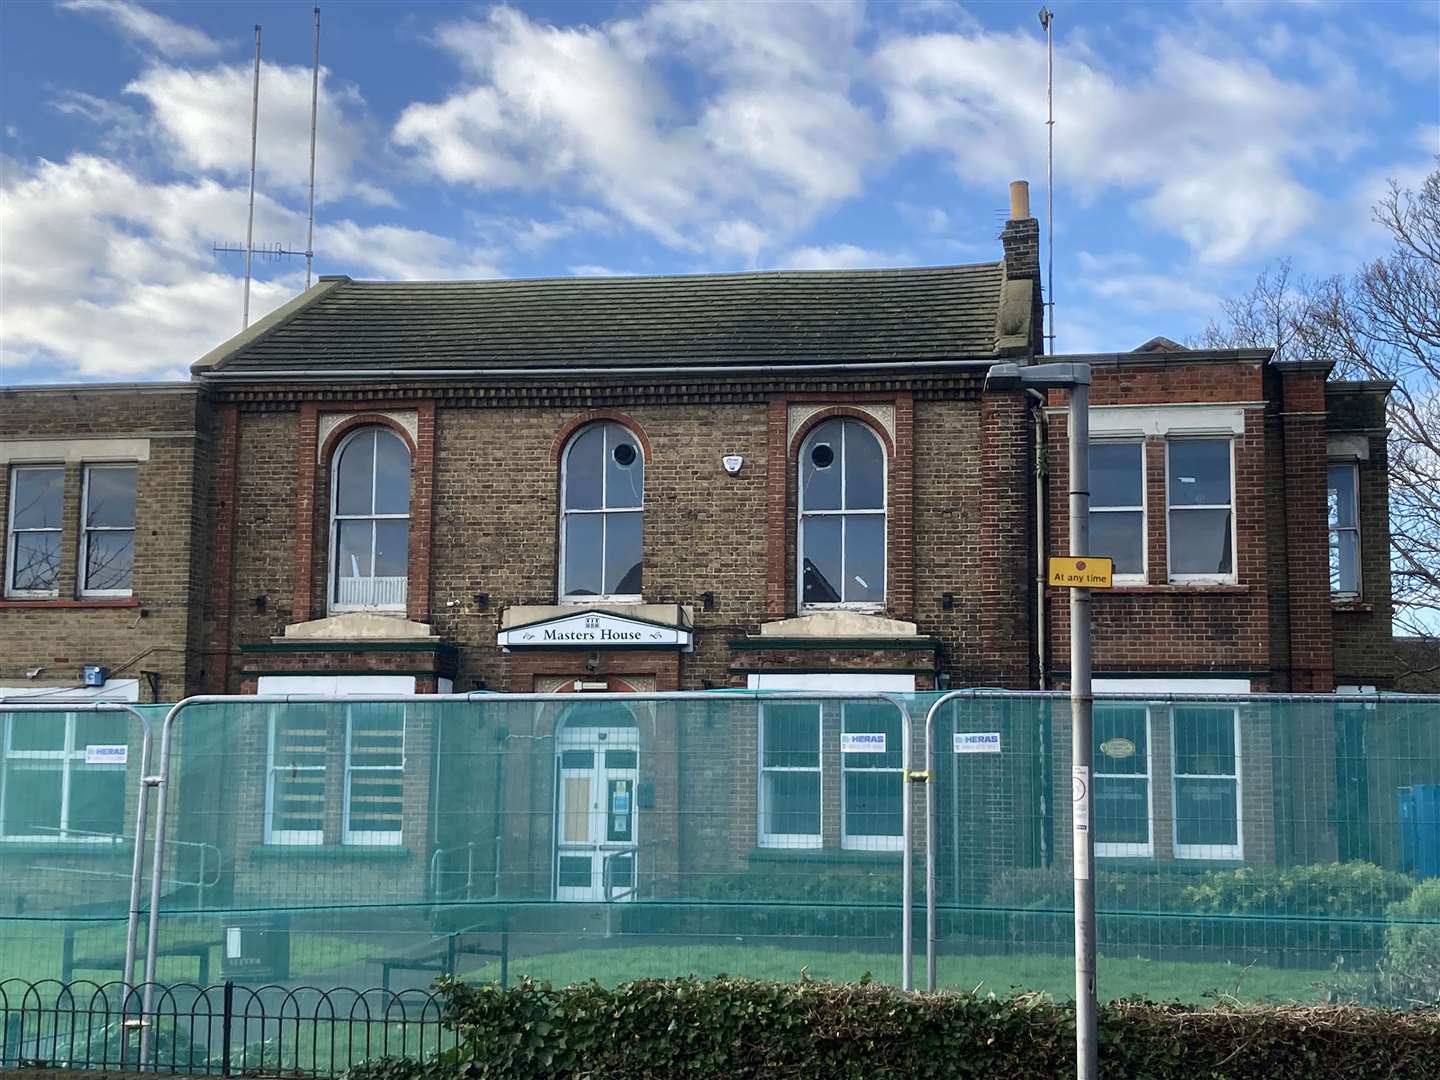 Renovation work started on Master's House, Sheerness, in January as part of a £1.3m scheme to turn it into a community and business hub